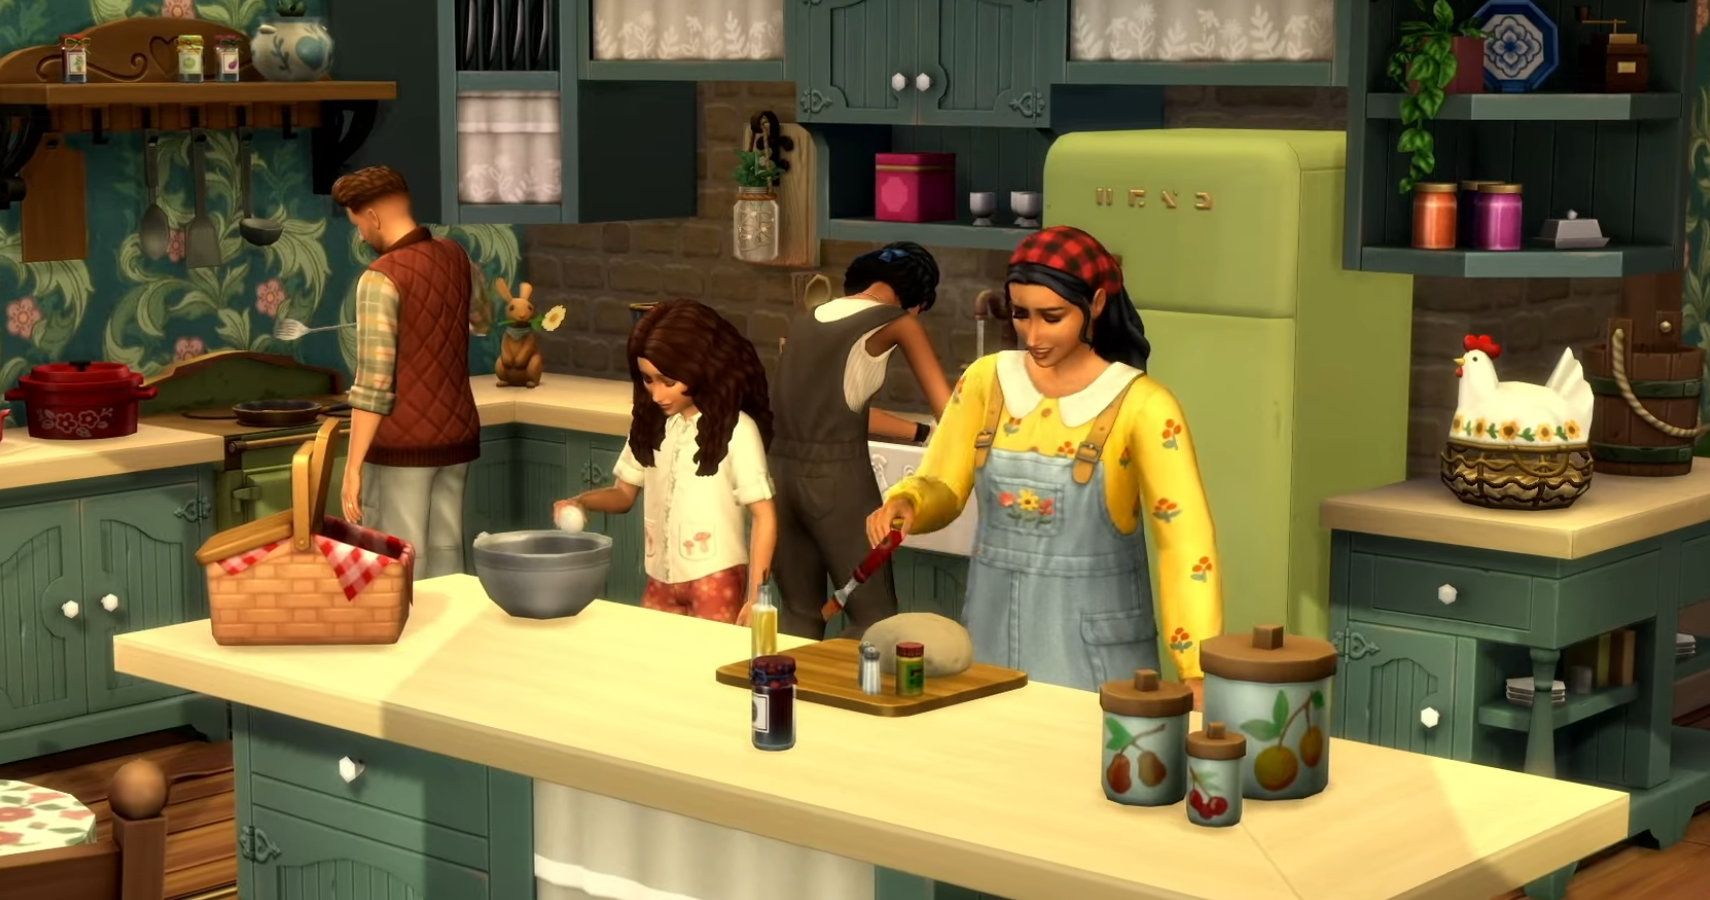 A Sims family in the kitchen